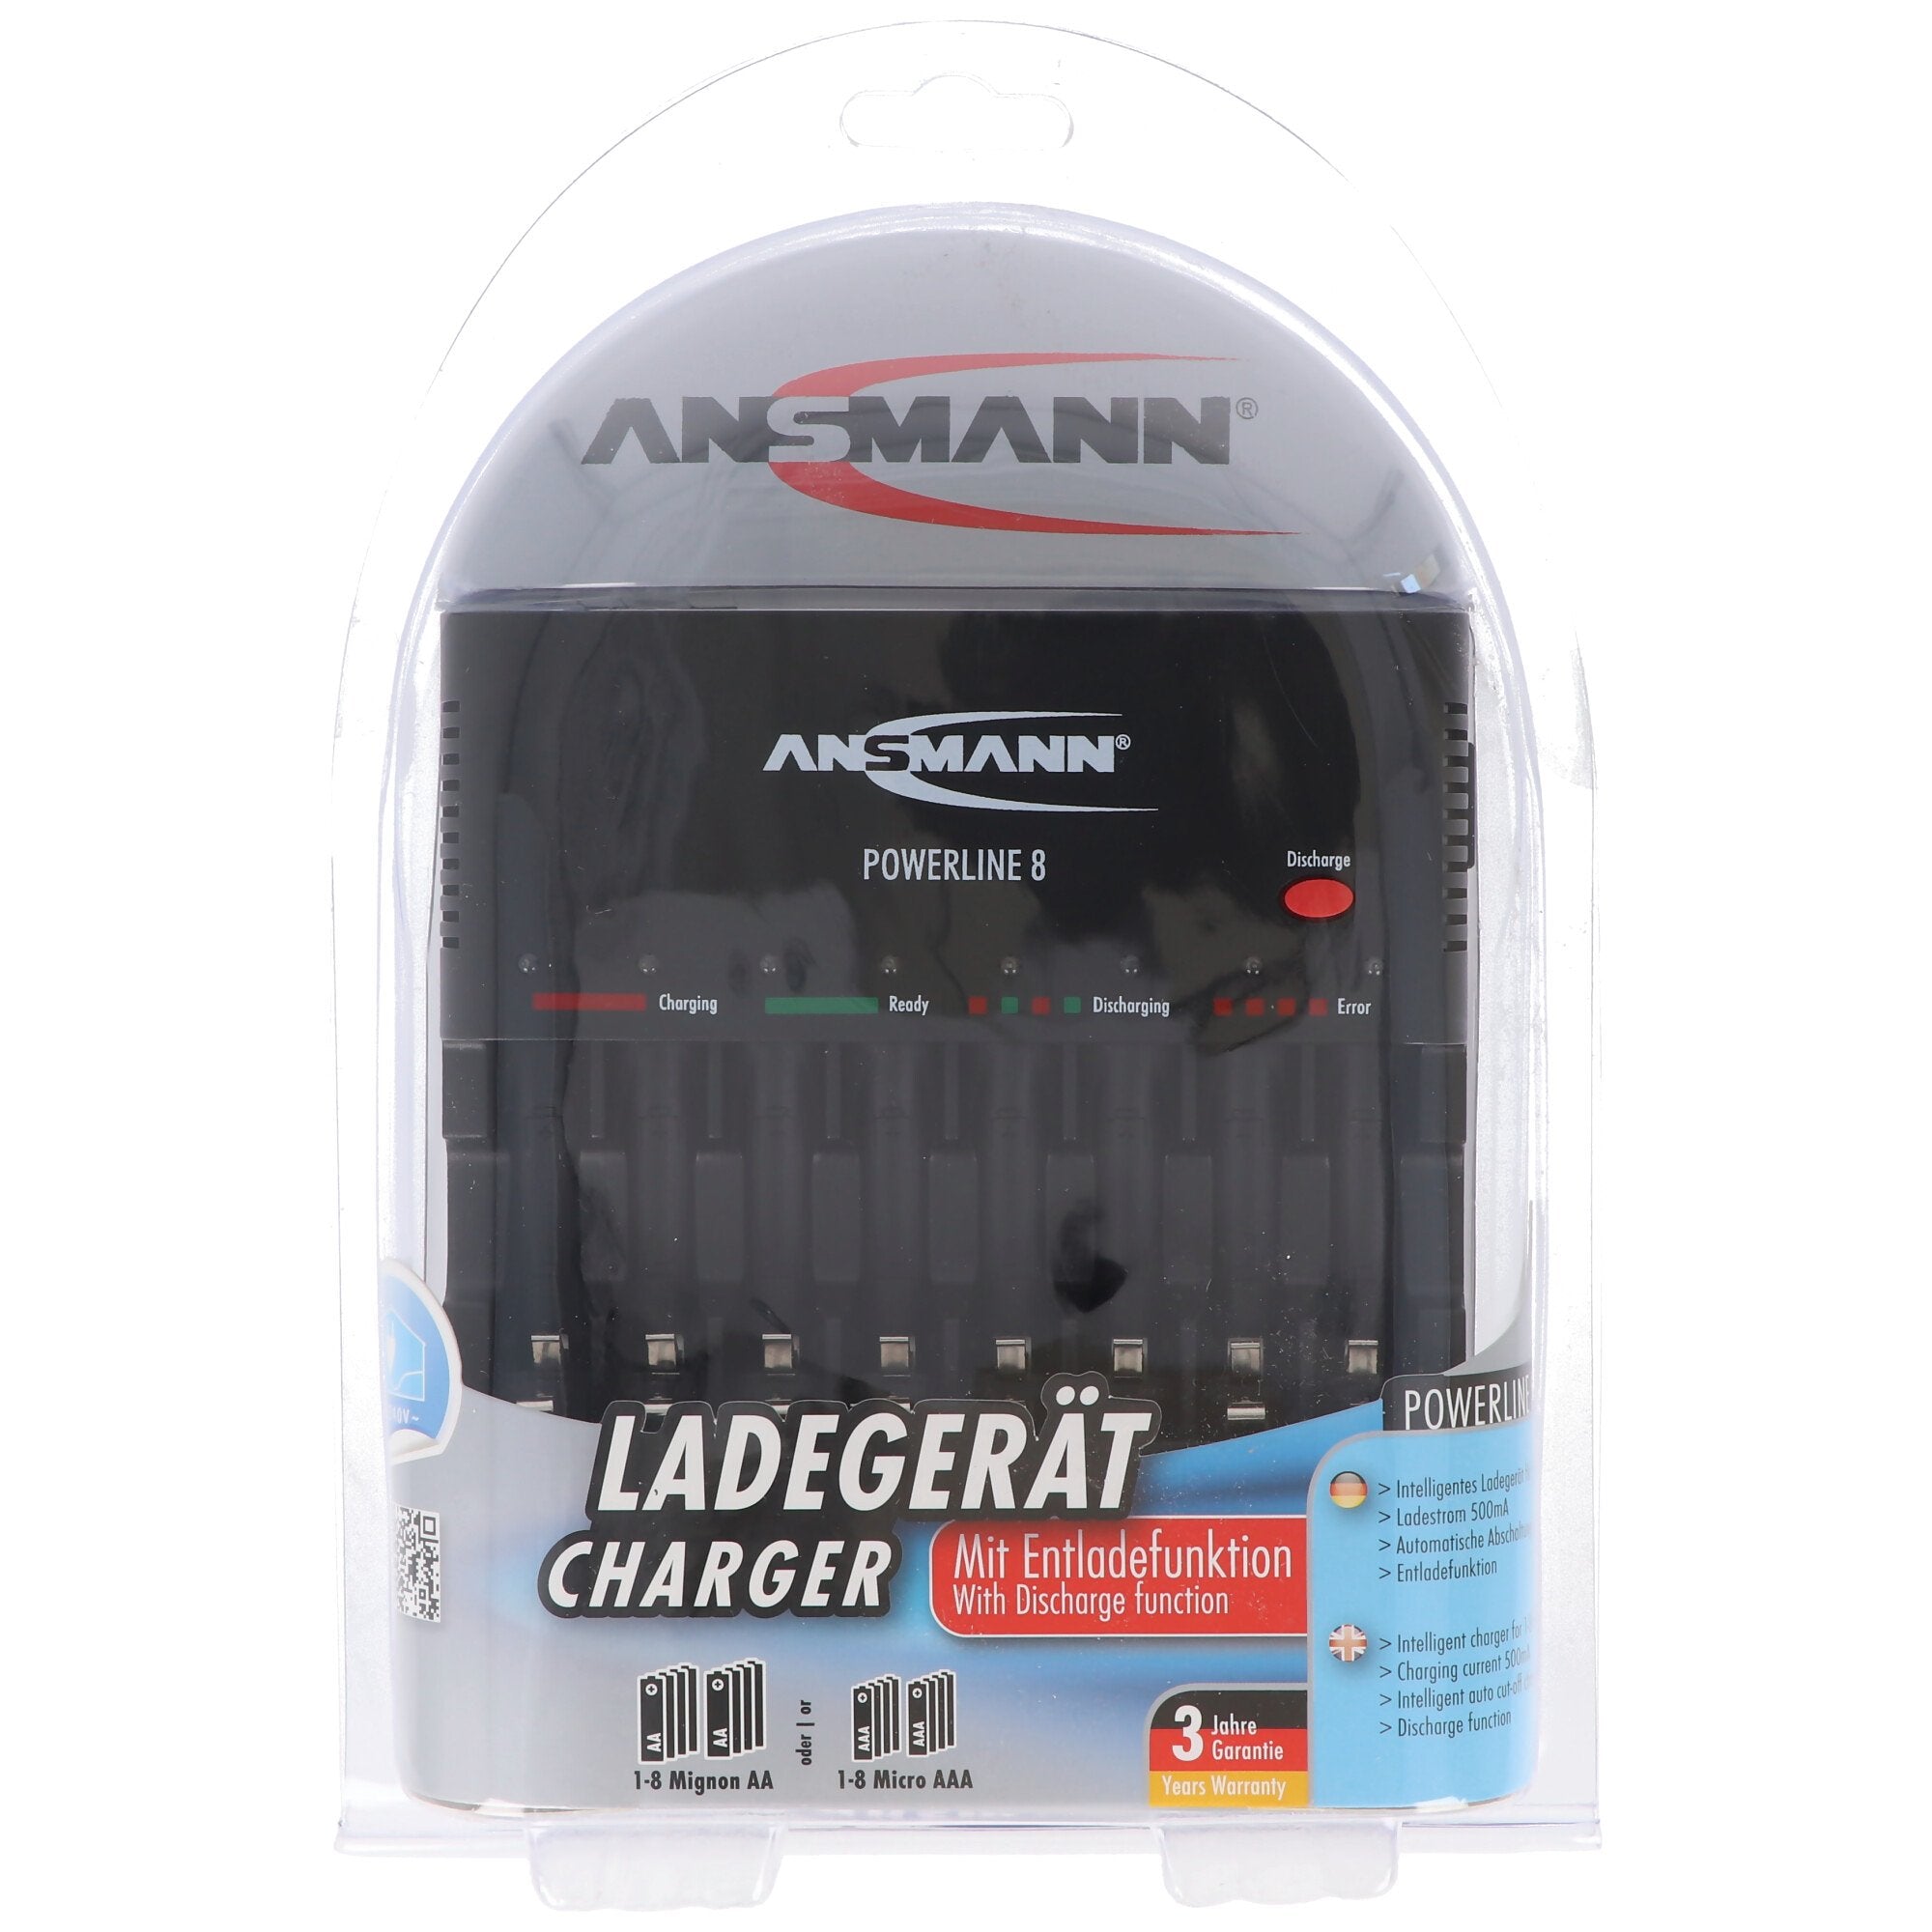 Ansmann Powerline 8 for 1-8 AA / AAA batteries and USB charging socket 1001-0006